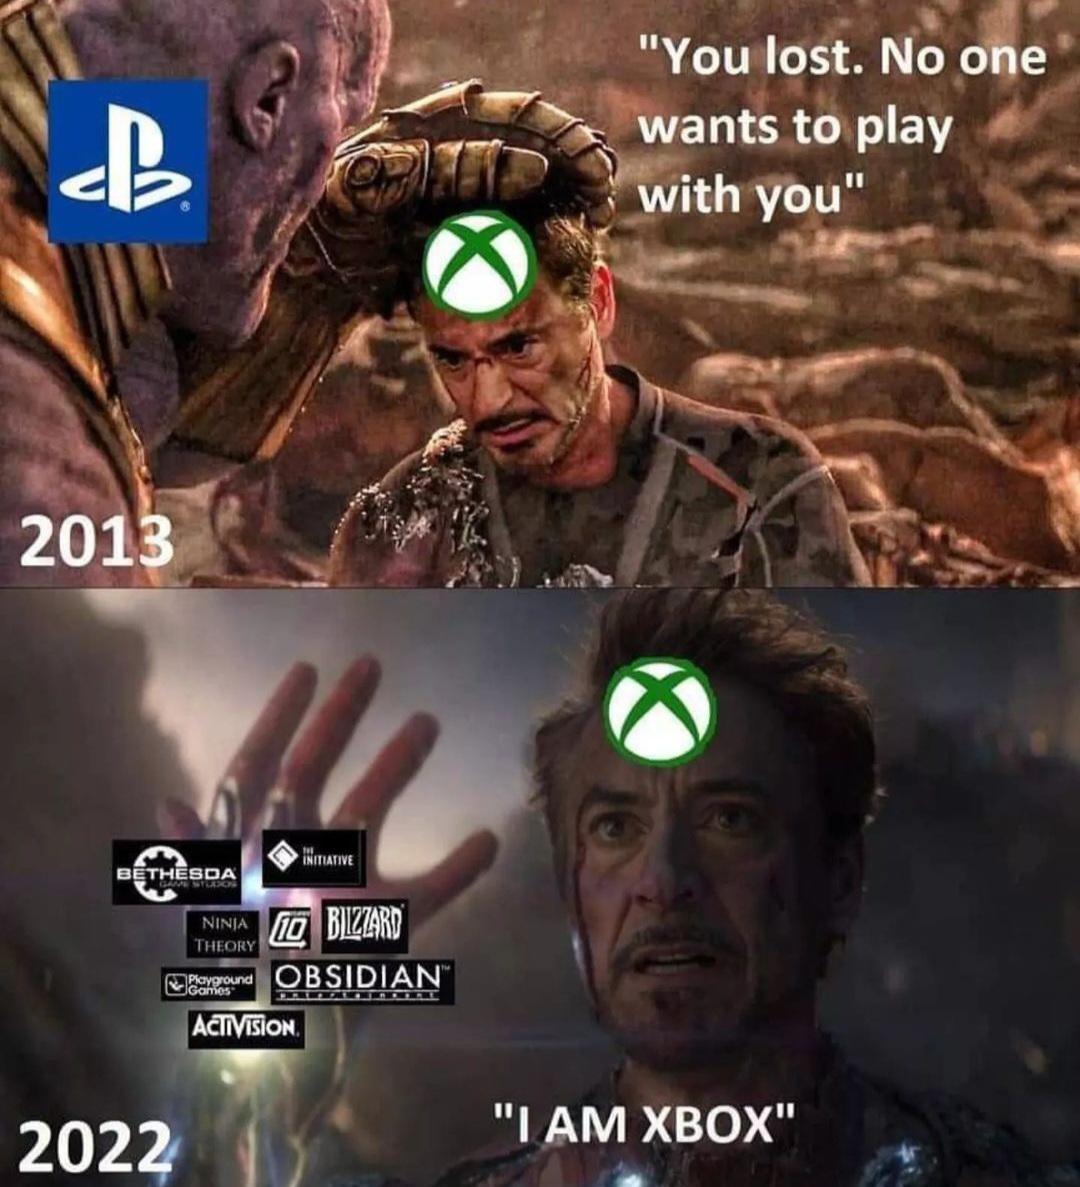 funny memes - dank memes - pes 2014 - B "You lost. No one wants to play with you" 2013 Initiative Bethesda Nestlano Theory Ninia To Blizzard Paypround Obsidian Activision Games "I Am Xbox" 2022